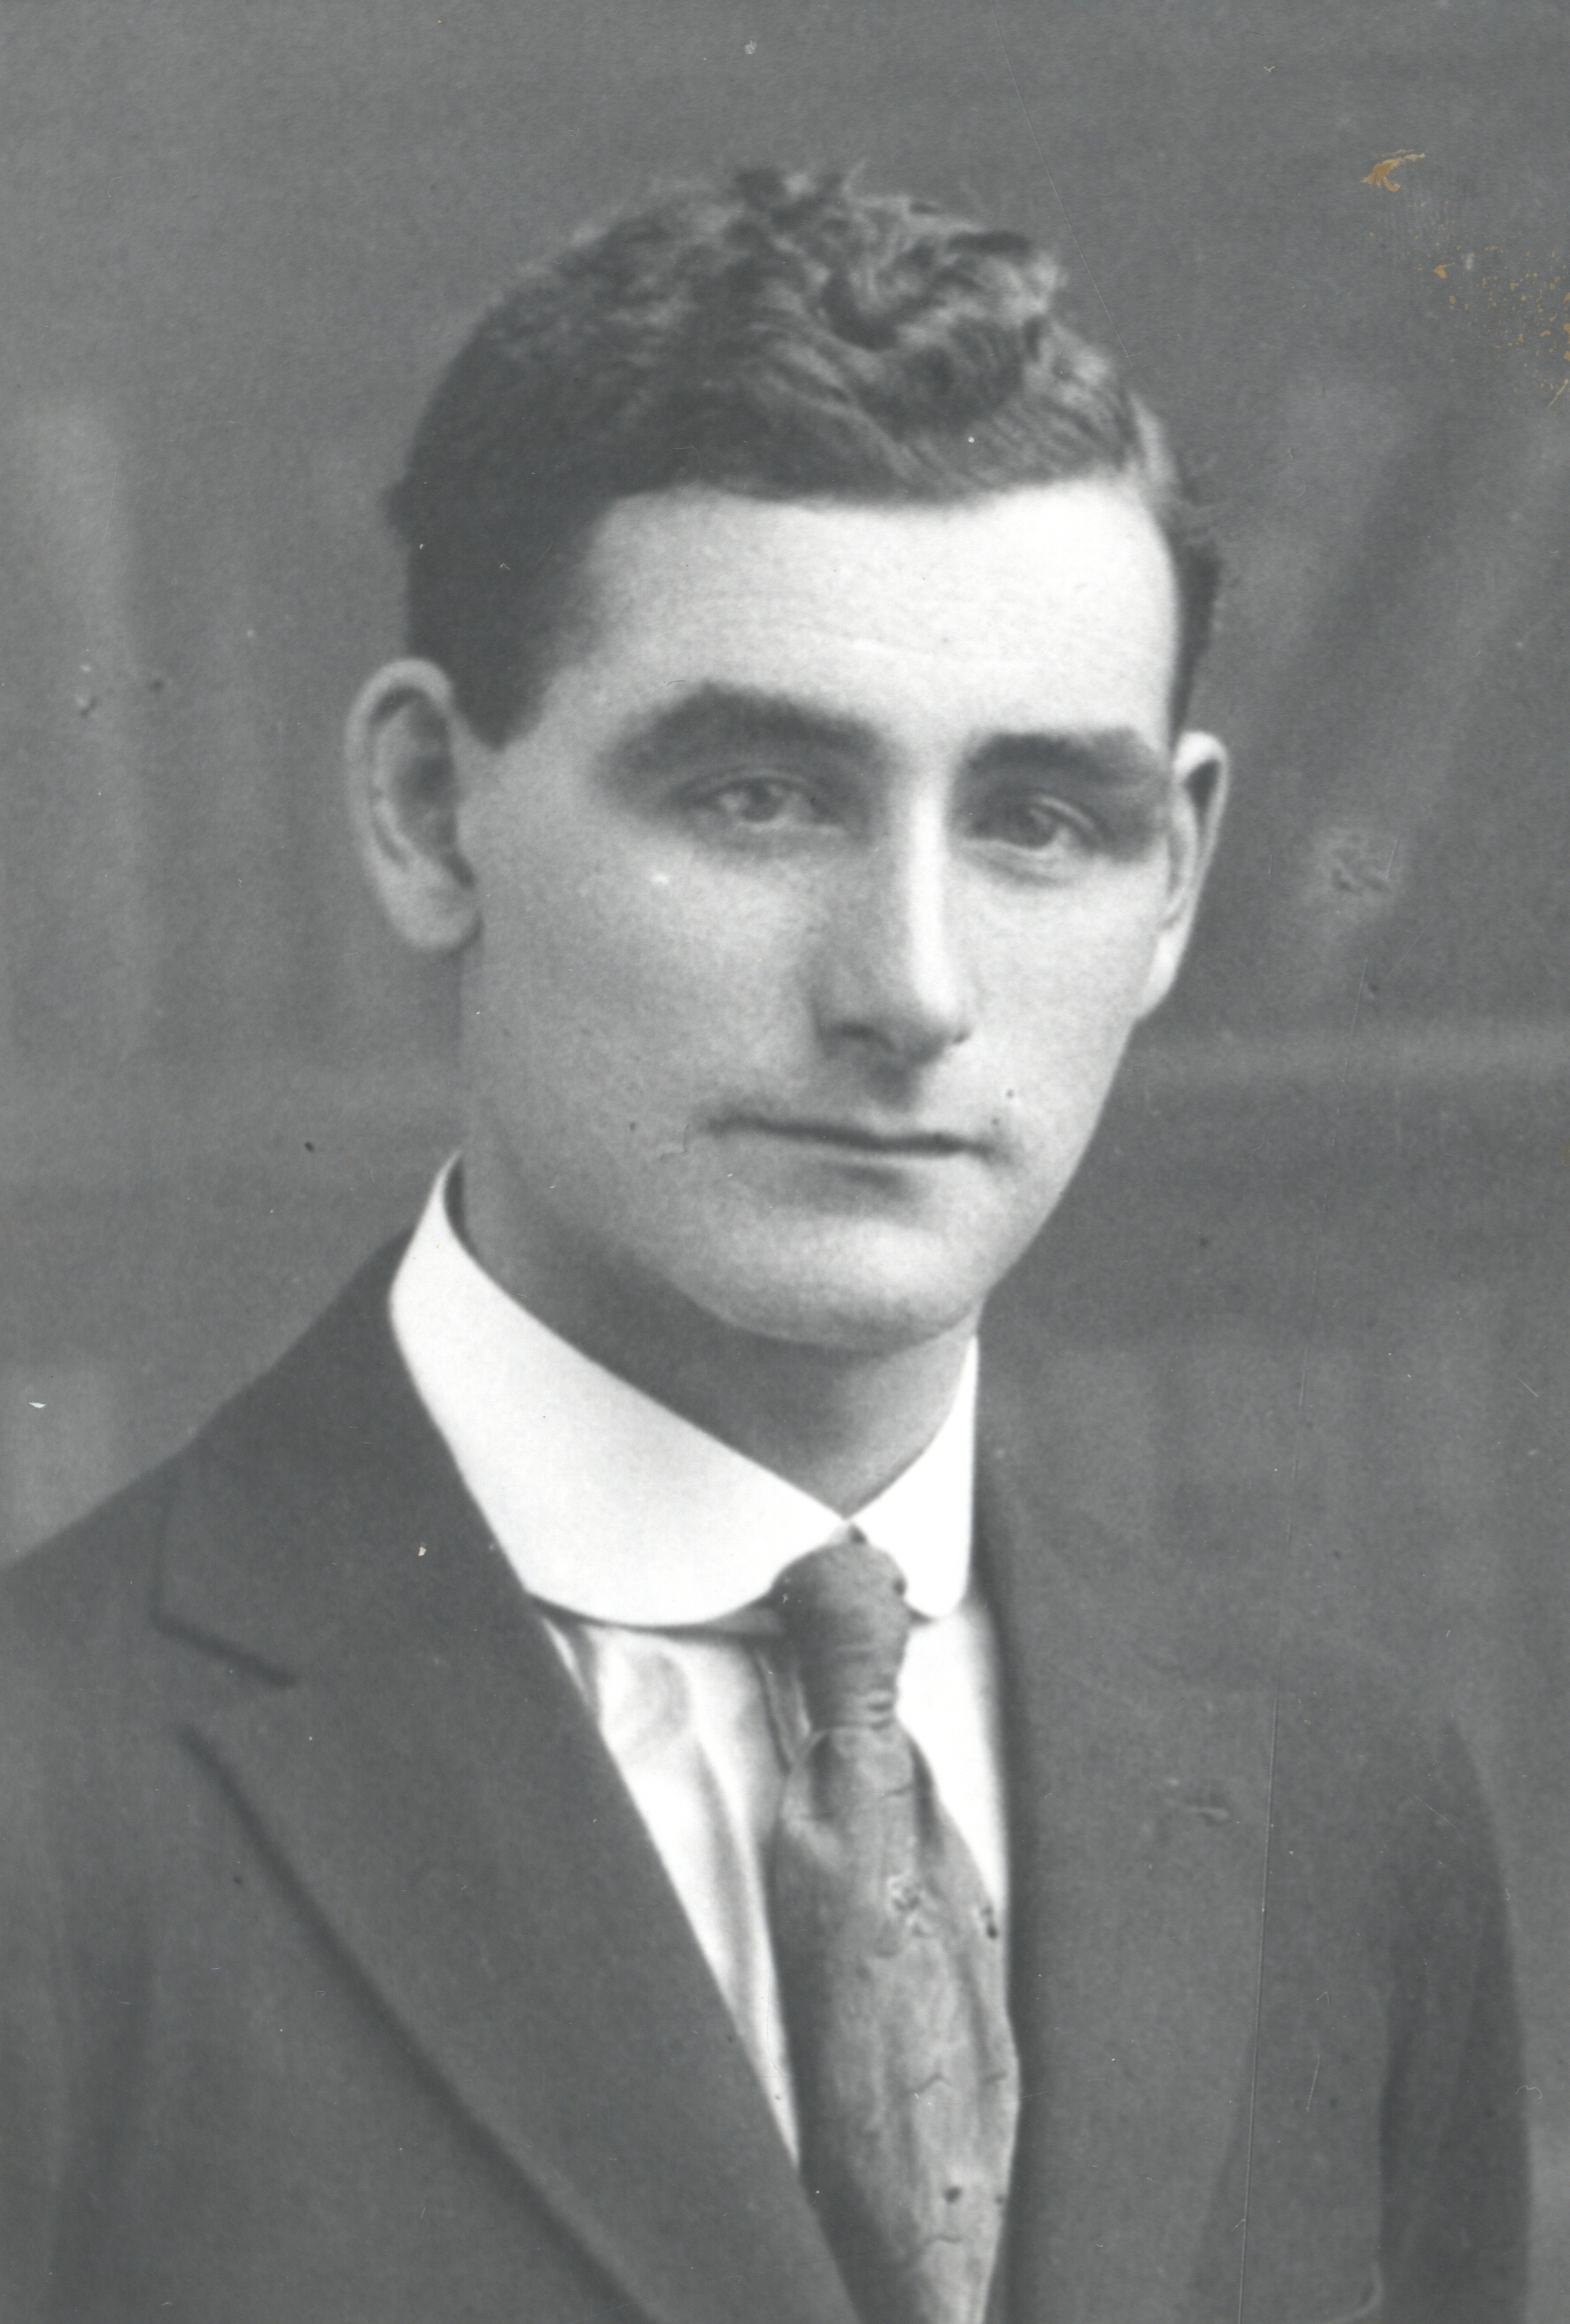 Black and white archival photograph of a man in a suit and tie.